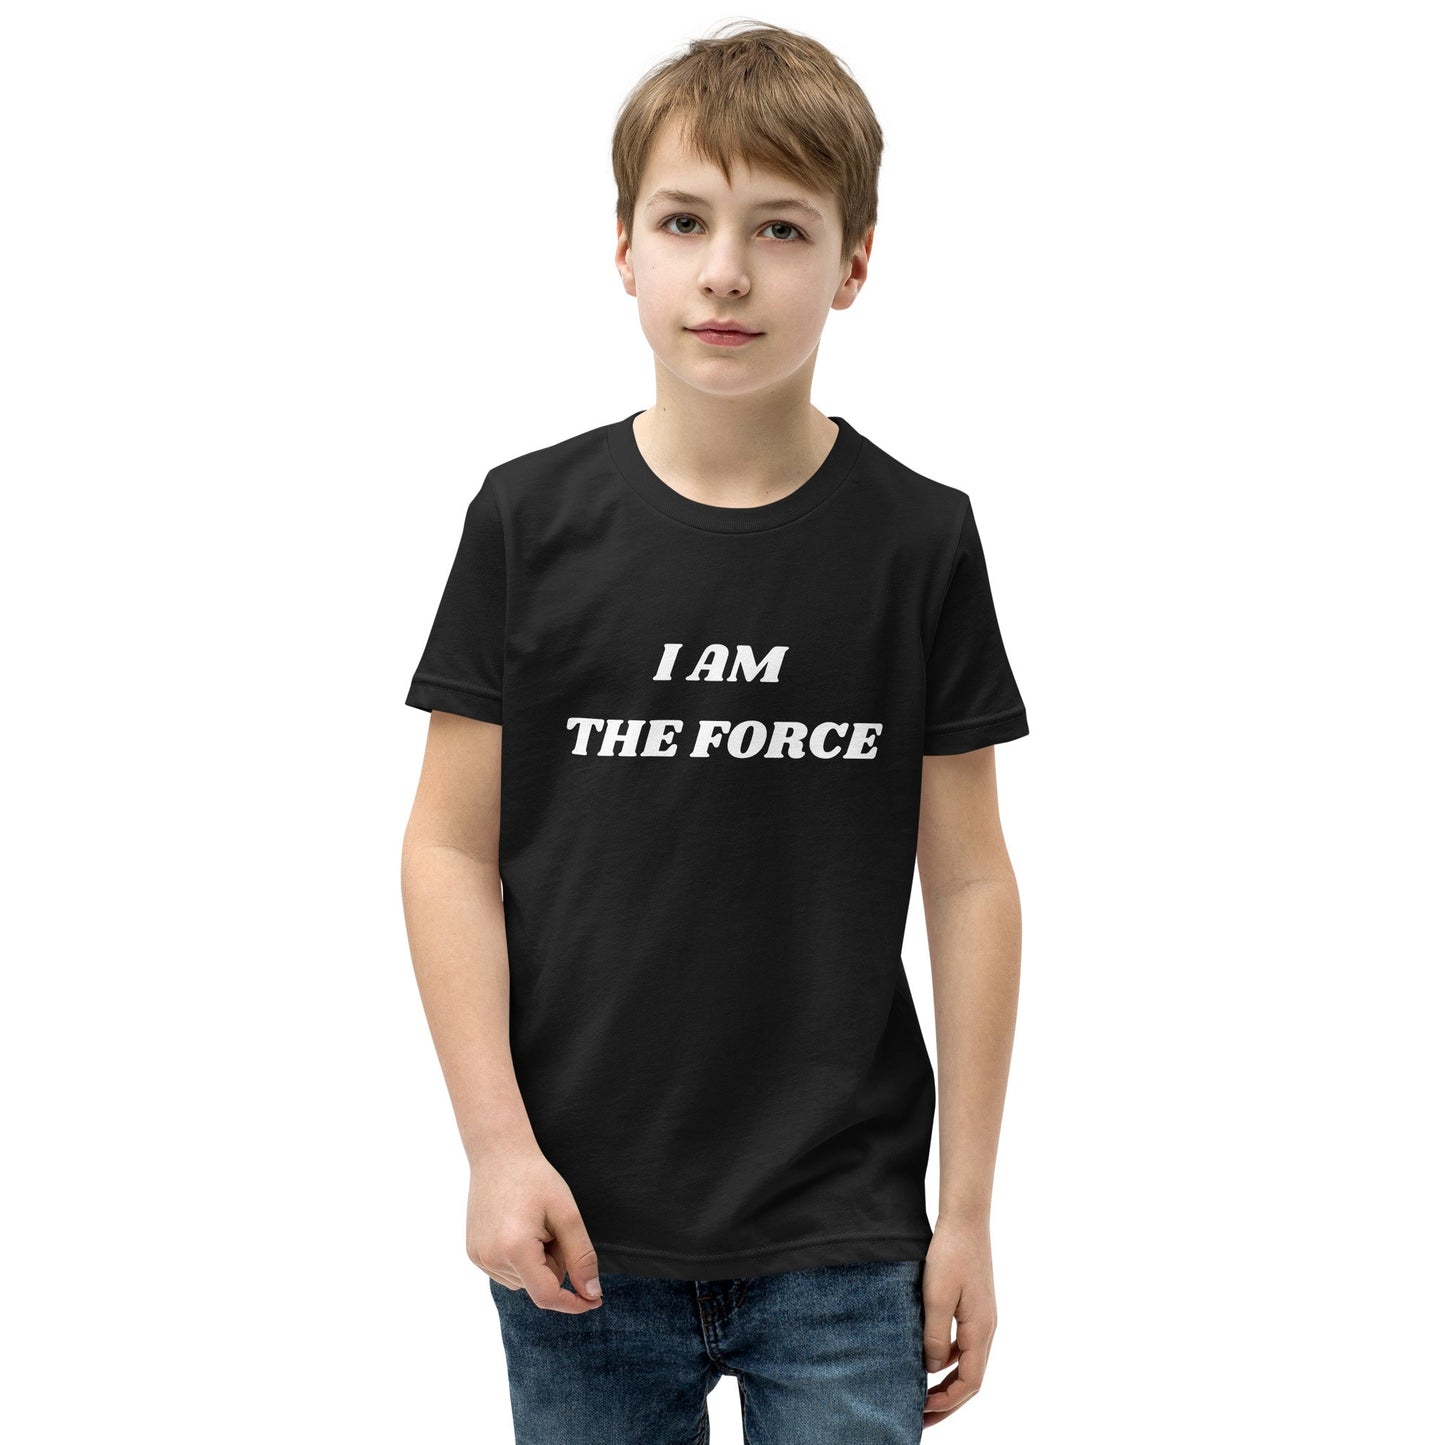 I AM THE FORCE | Youth Short Sleeve T-Shirt